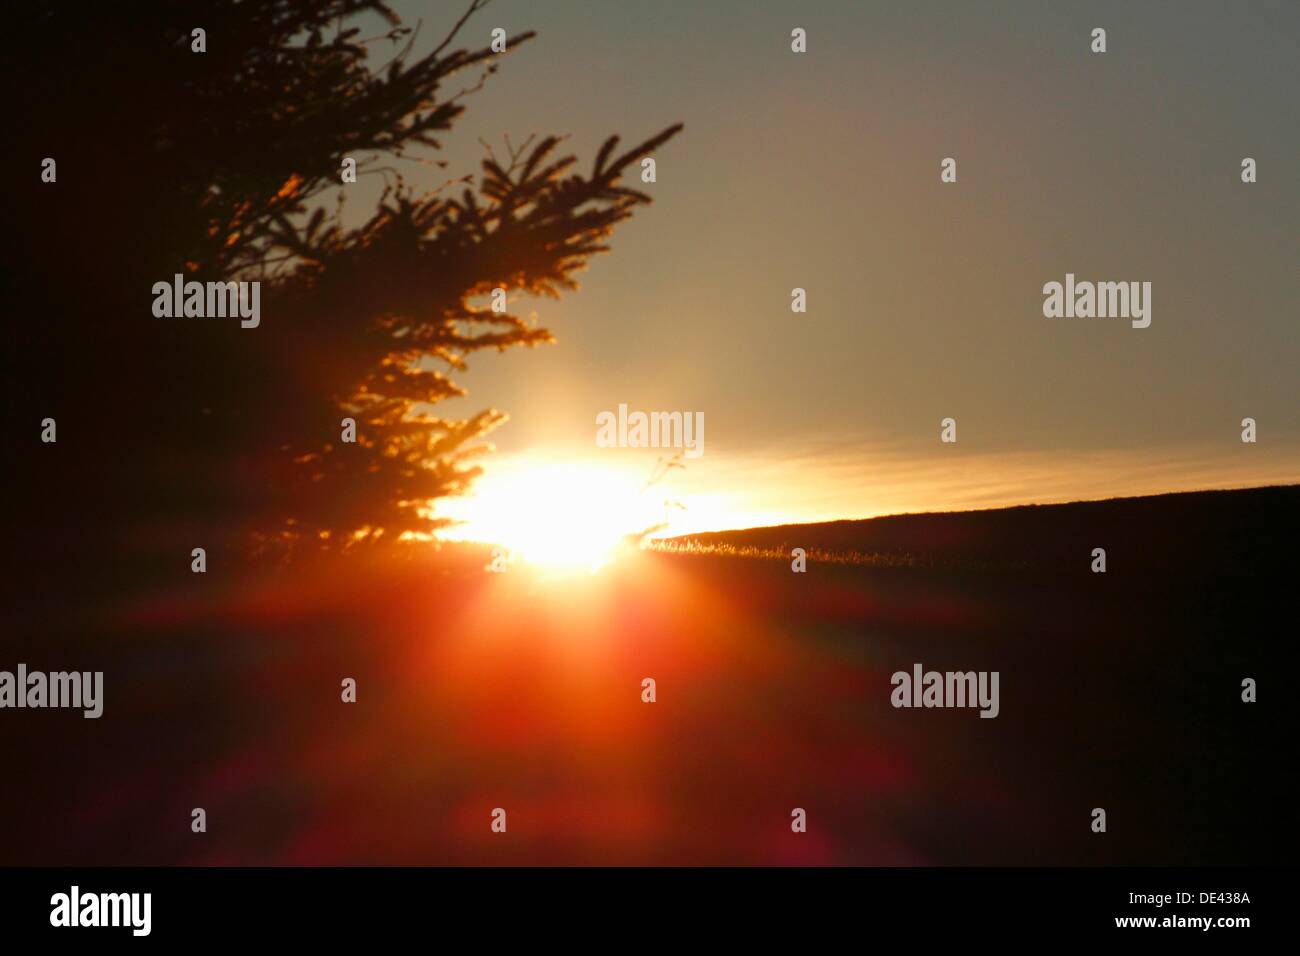 a sunburst through a cloud over a hill and beside a tree Stock Photo